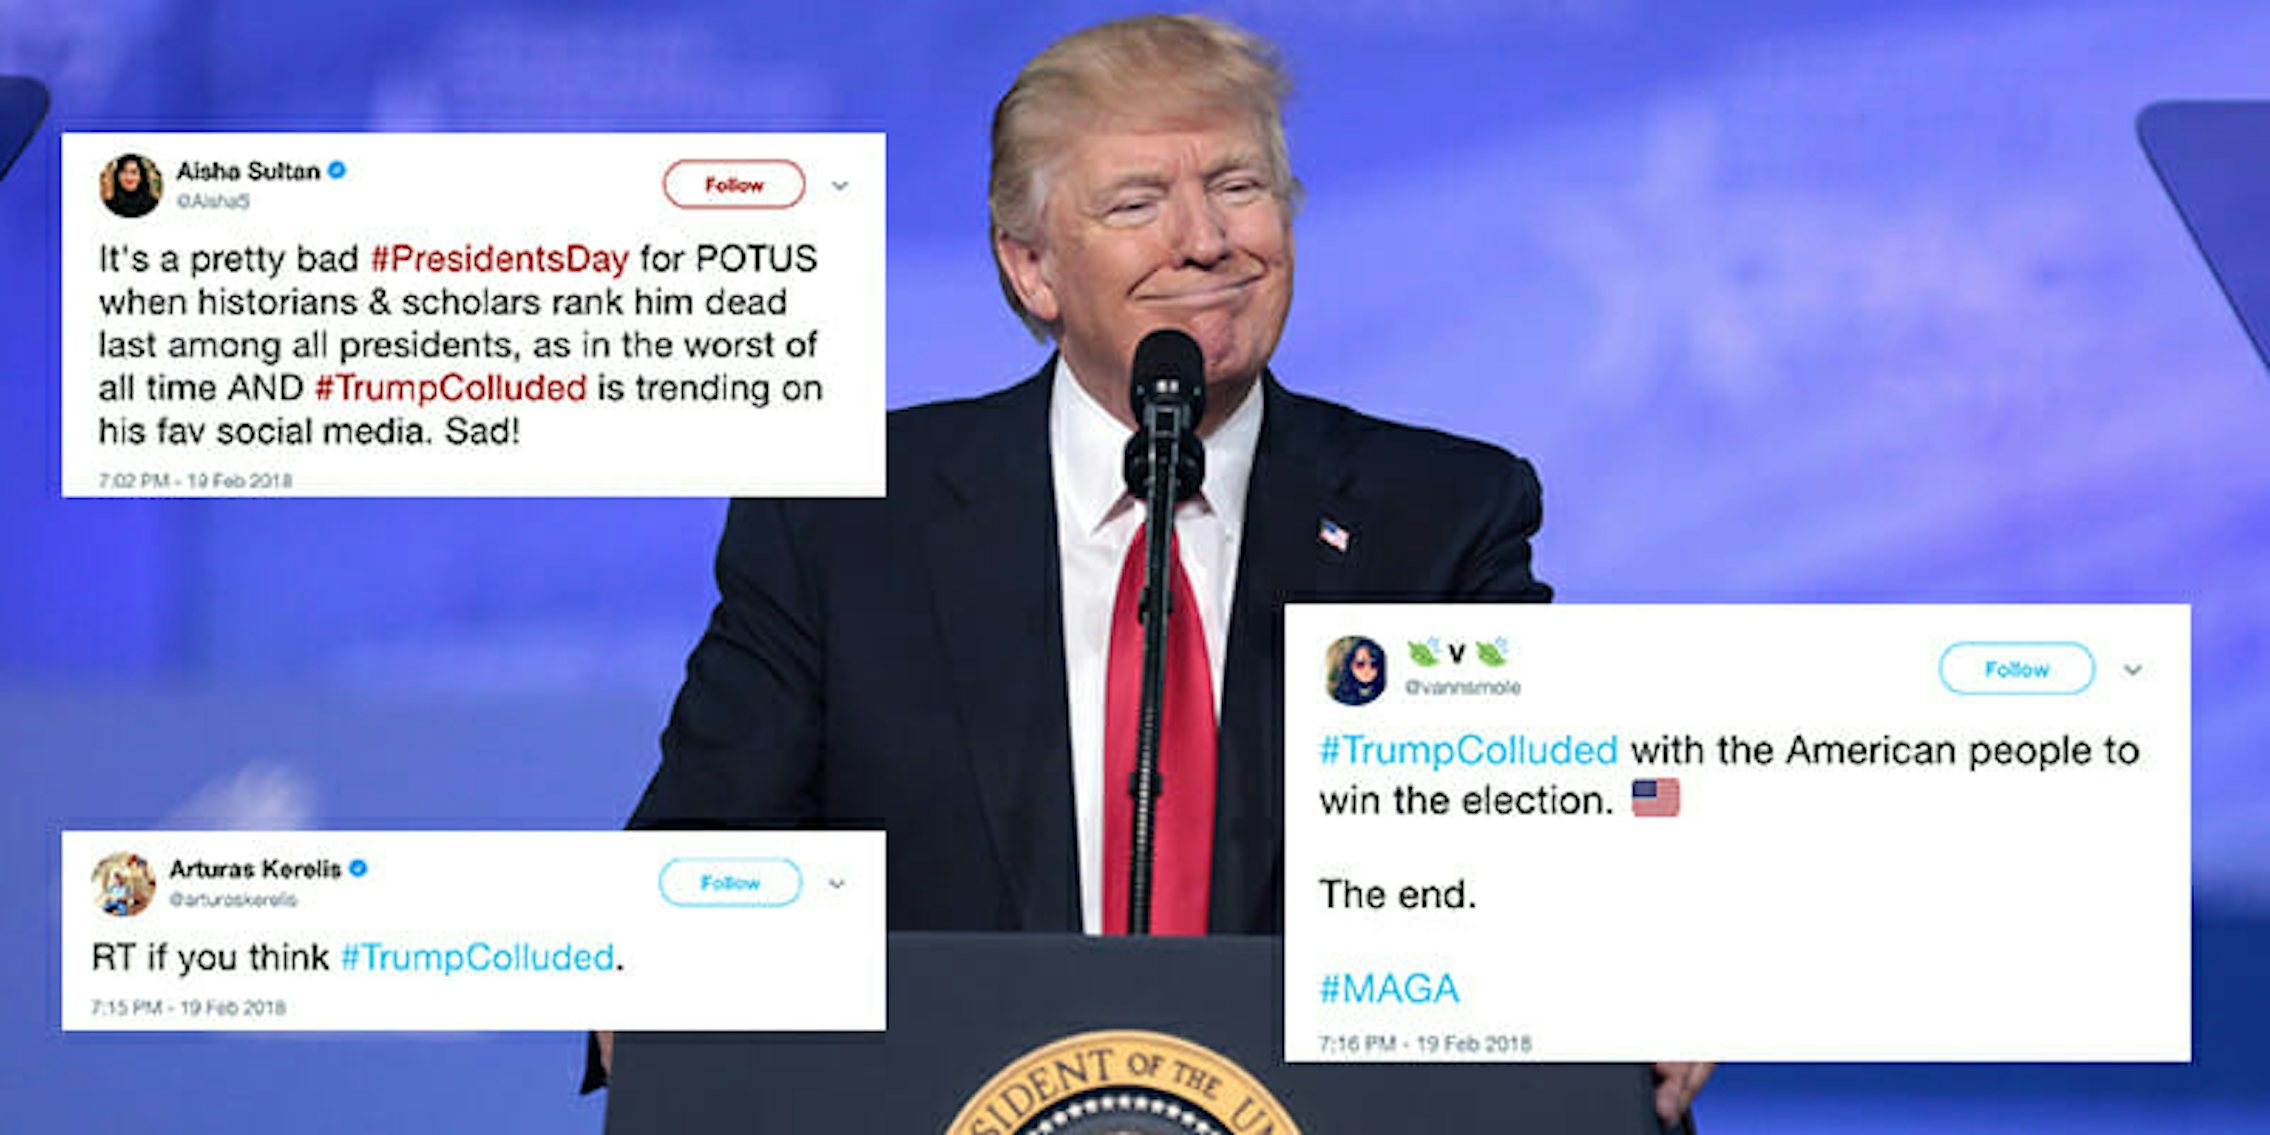 #TrumpColluded went viral on Twitter on Presidents Day.